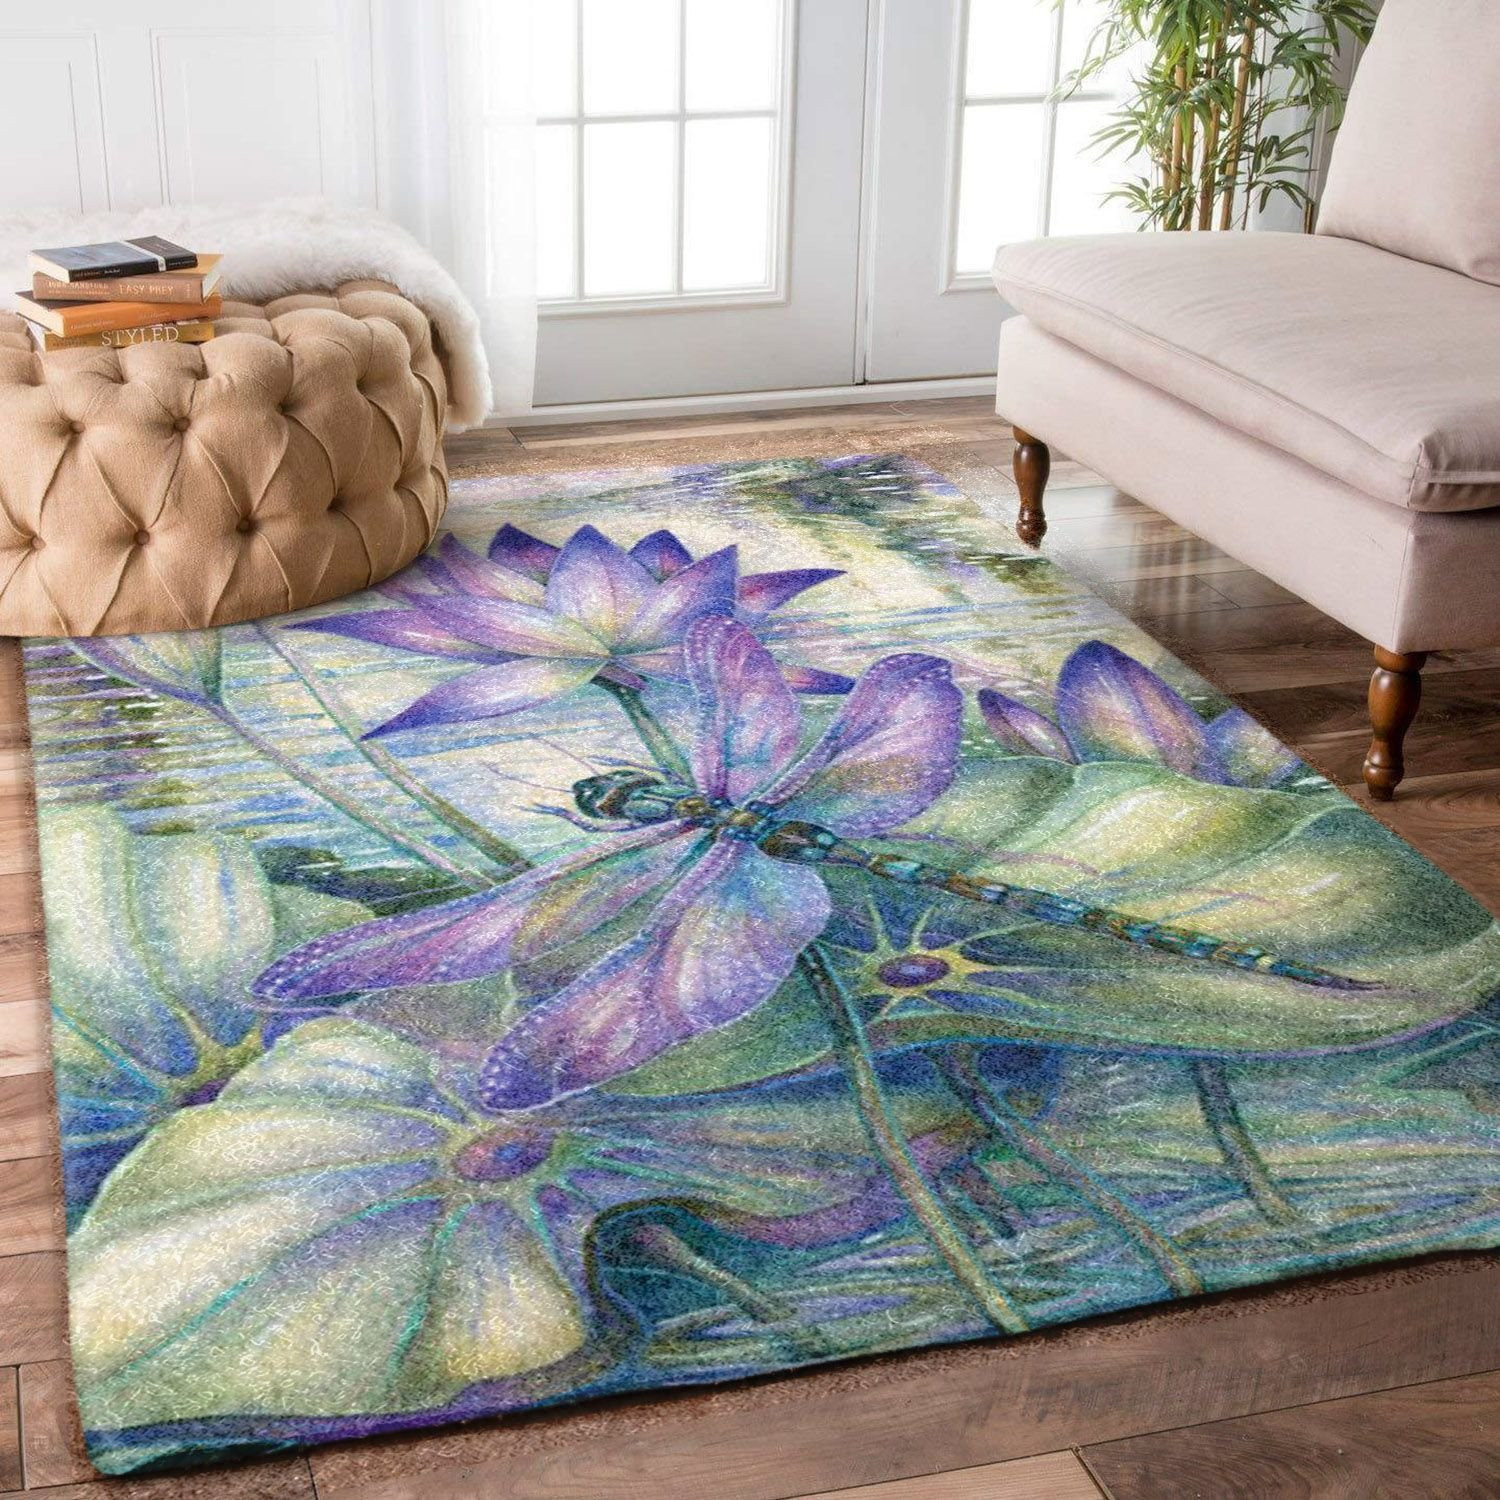 Lotus Dragonfly Rugs Home Decor